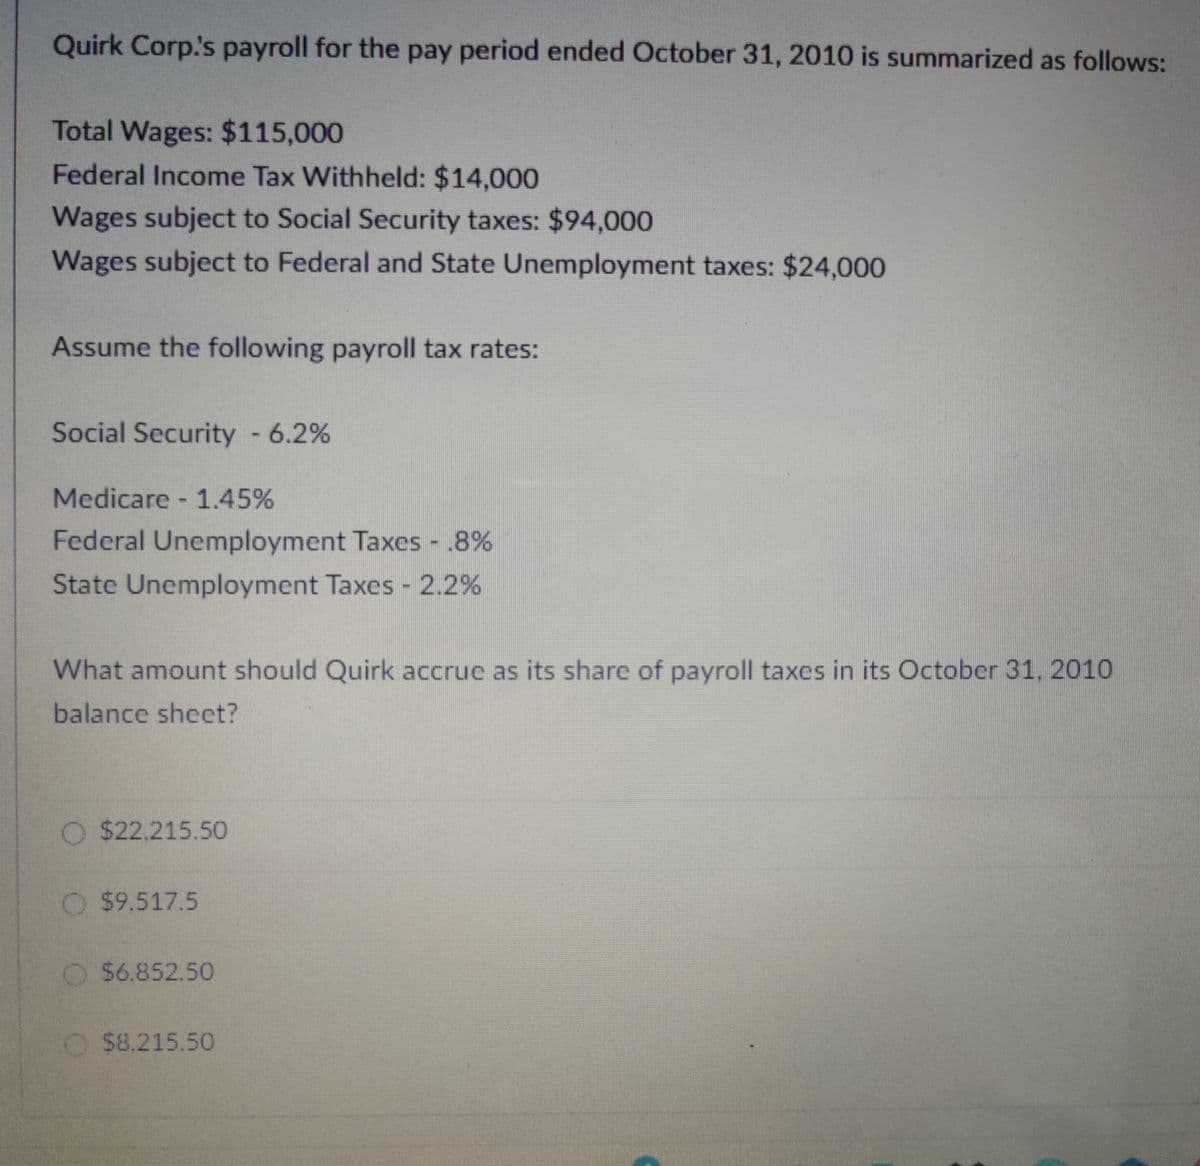 Quirk Corp.'s payroll for the pay period ended October 31, 2010 is summarized as follows:
Total Wages: $115,000
Federal Income Tax Withheld: $14,000
Wages subject to Social Security taxes: $94,000
Wages subject to Federal and State Unemployment taxes: $24,000
Assume the following payroll tax rates:
Social Security - 6.2%
Medicare - 1.45%
Federal Unemployment Taxes - .8%
State Unemployment Taxes - 2.2%
What amount should Quirk accrue as its share of payroll taxes in its October 31, 2010
balance sheet?
O $22,215.50
O $9.517.5
$6.852.50
$8.215.50